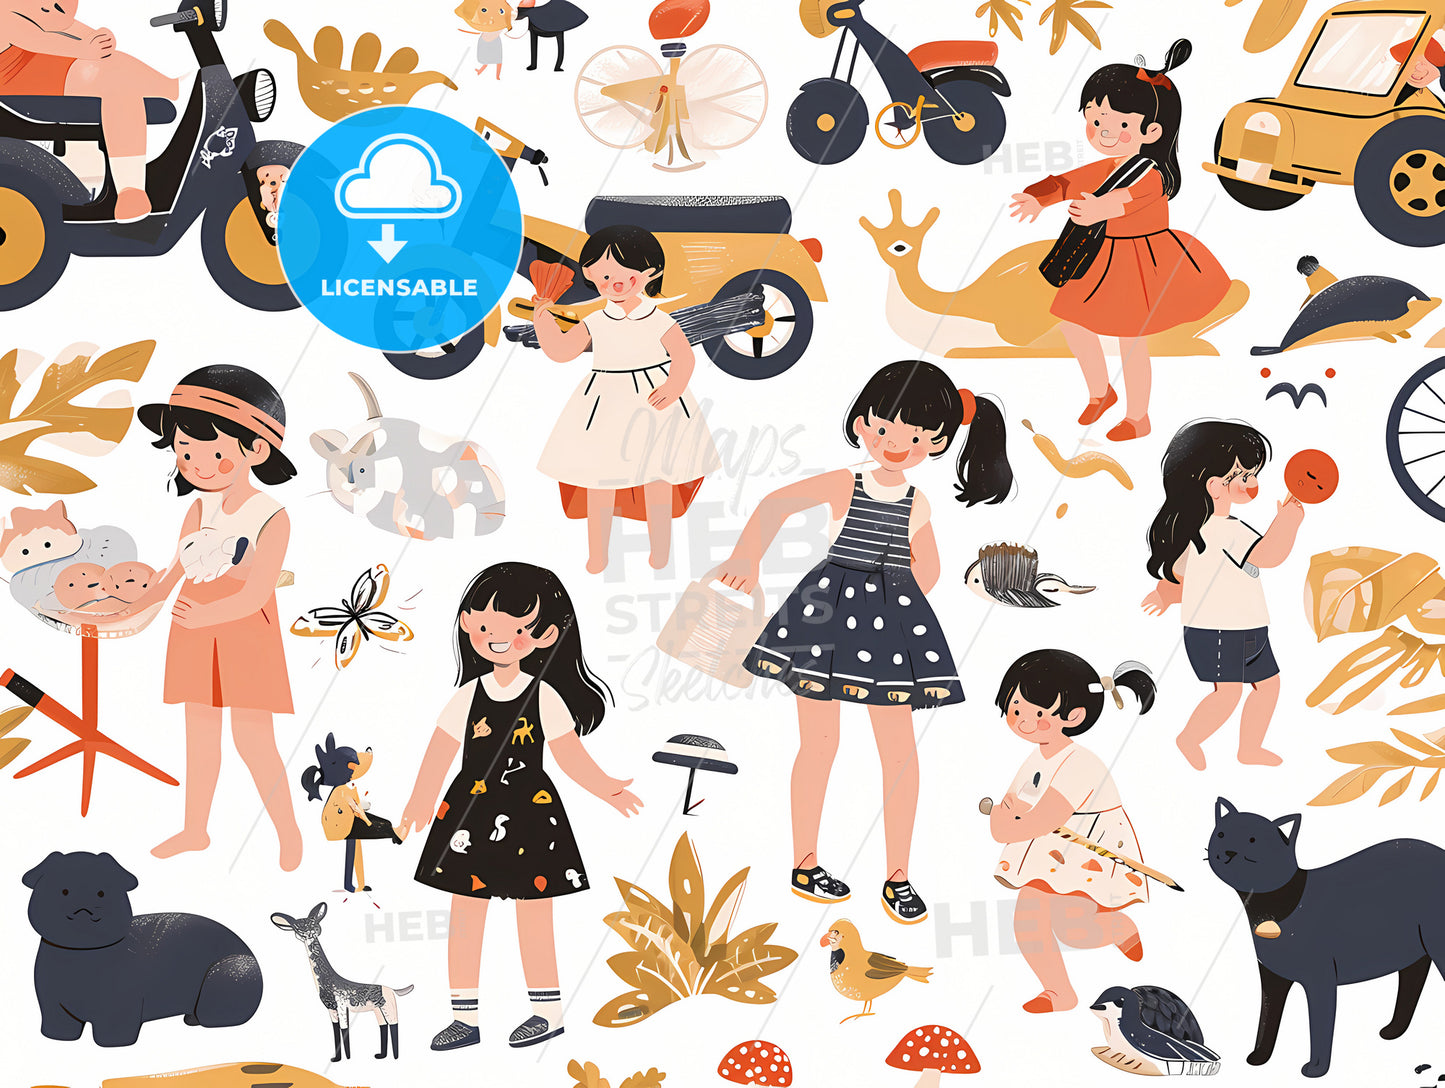 Simple And Relaxing Full Of Childrens Fun, A Pattern Of Girls And Various Objects